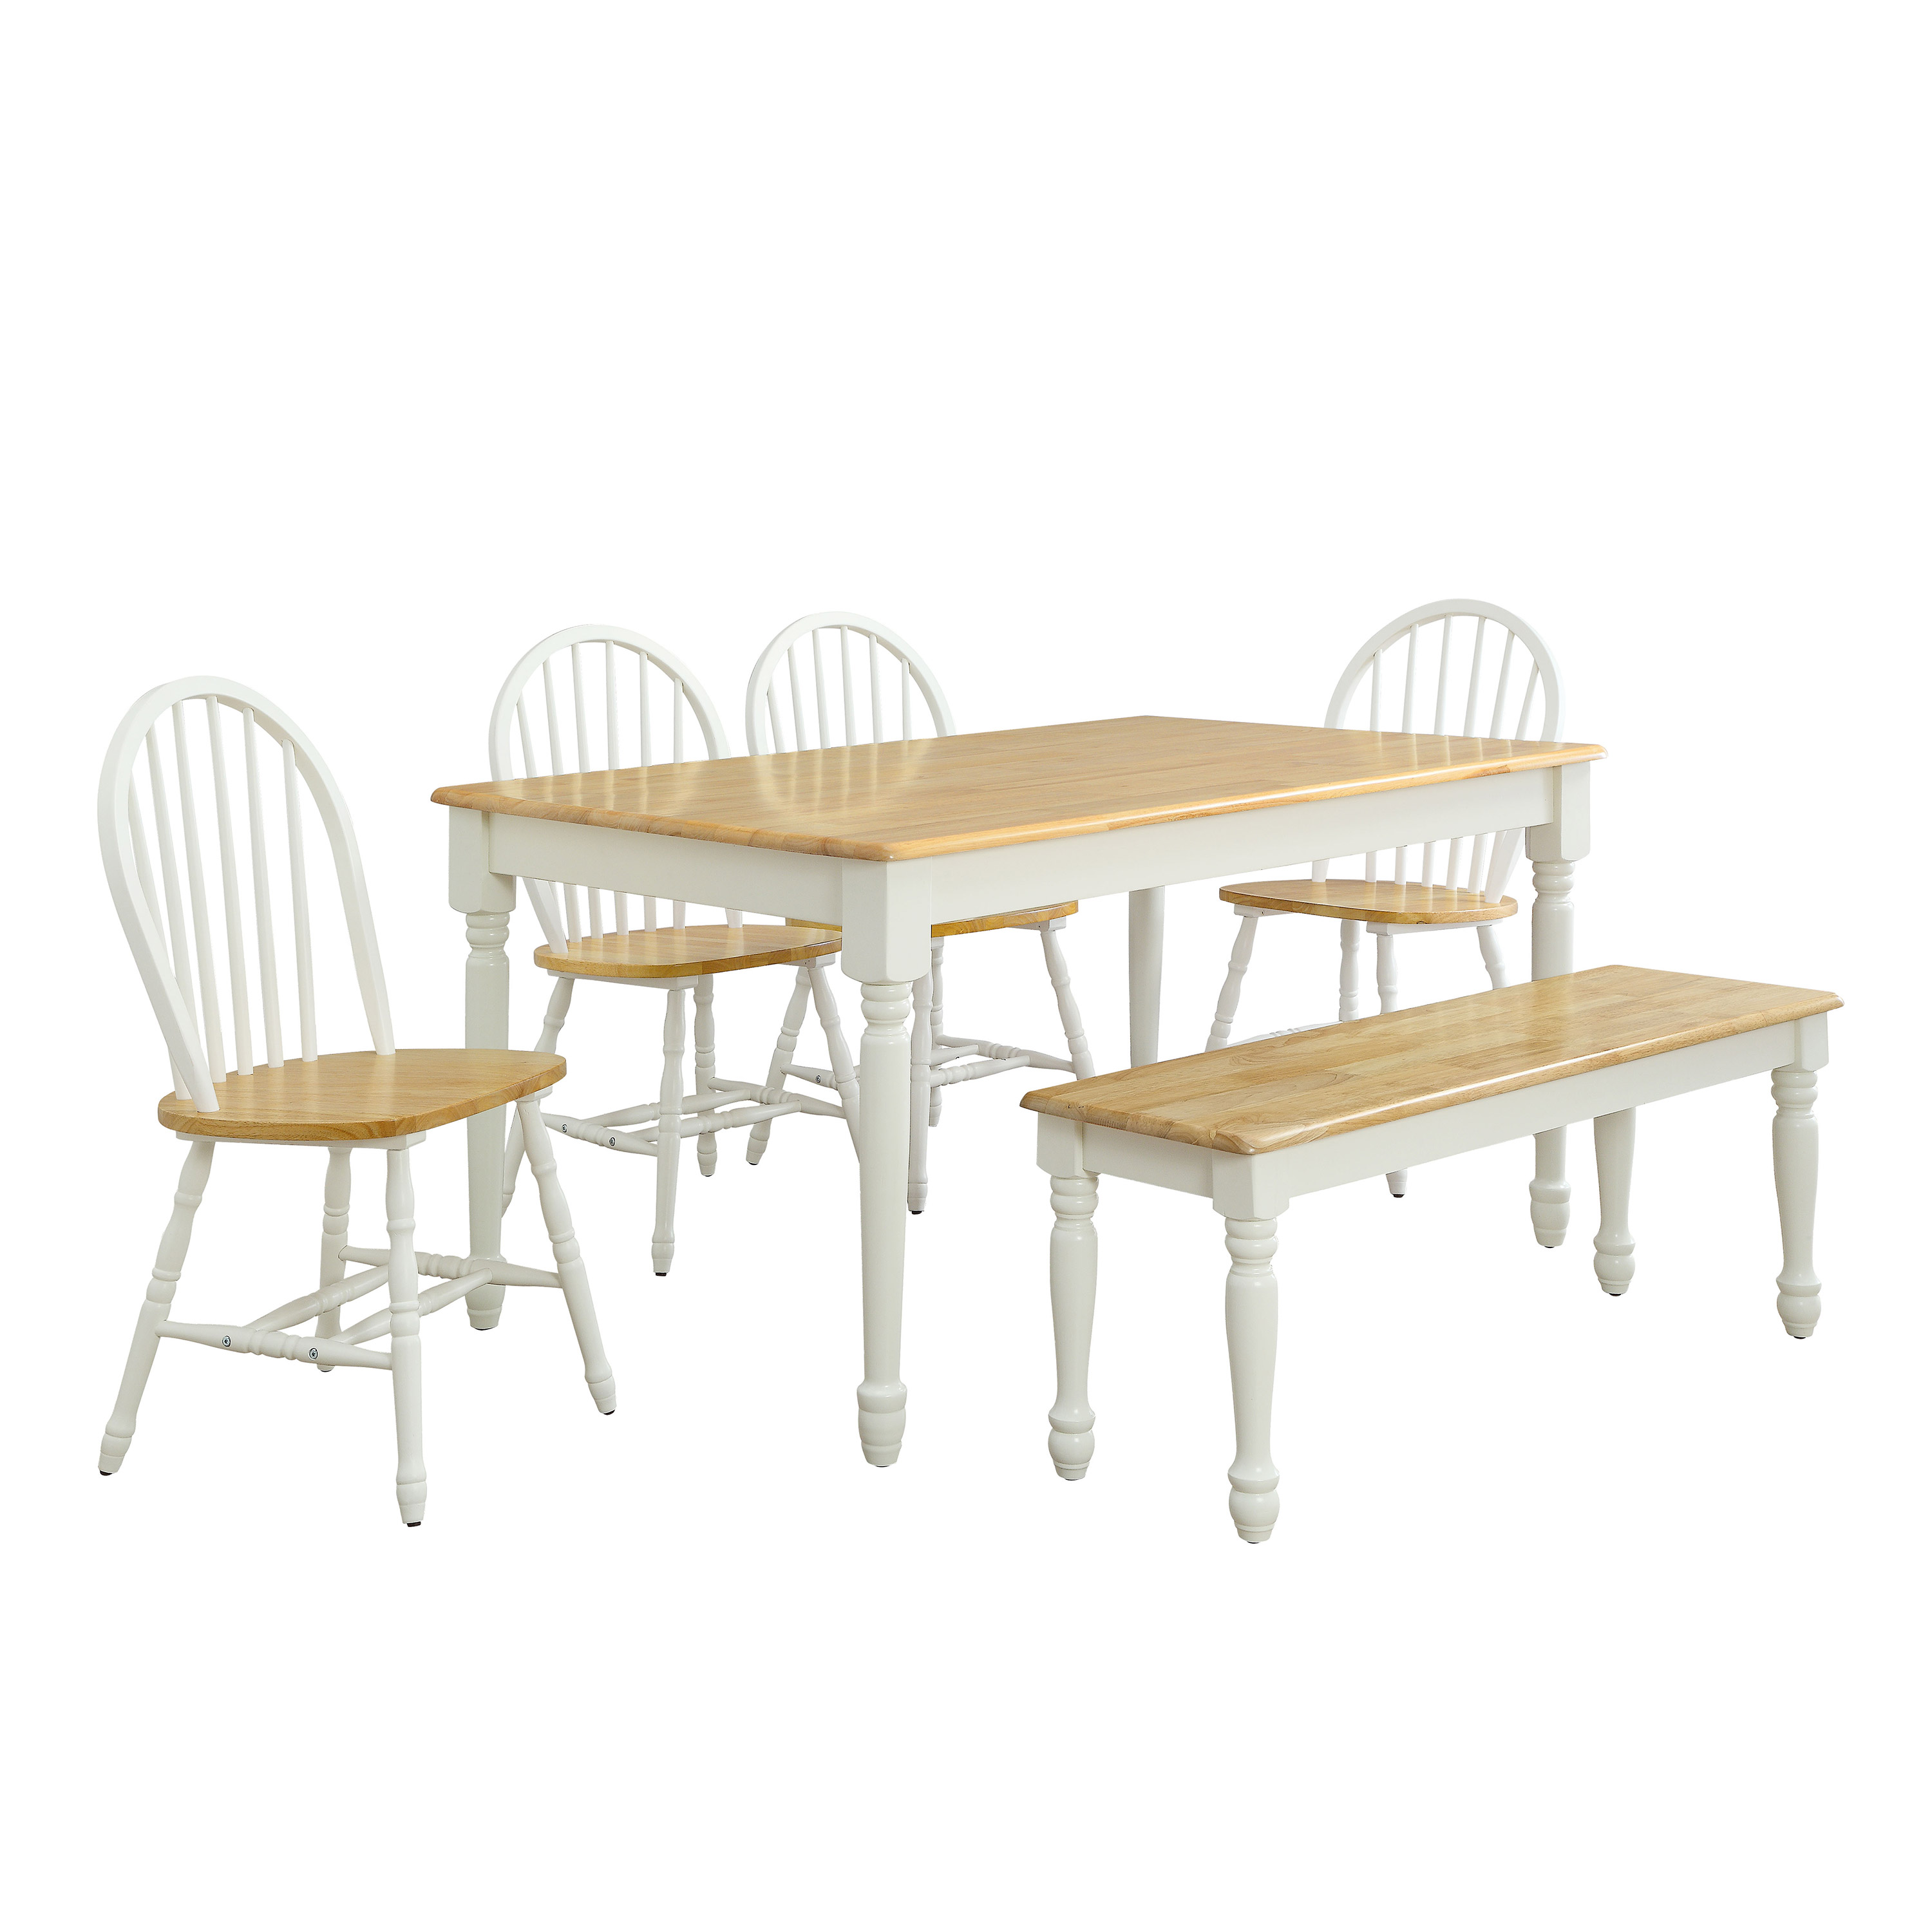 Better Homes and Gardens Autumn Lane Windsor Solid Wood Dining Chairs, White and Oak (Set of 2) - image 3 of 8